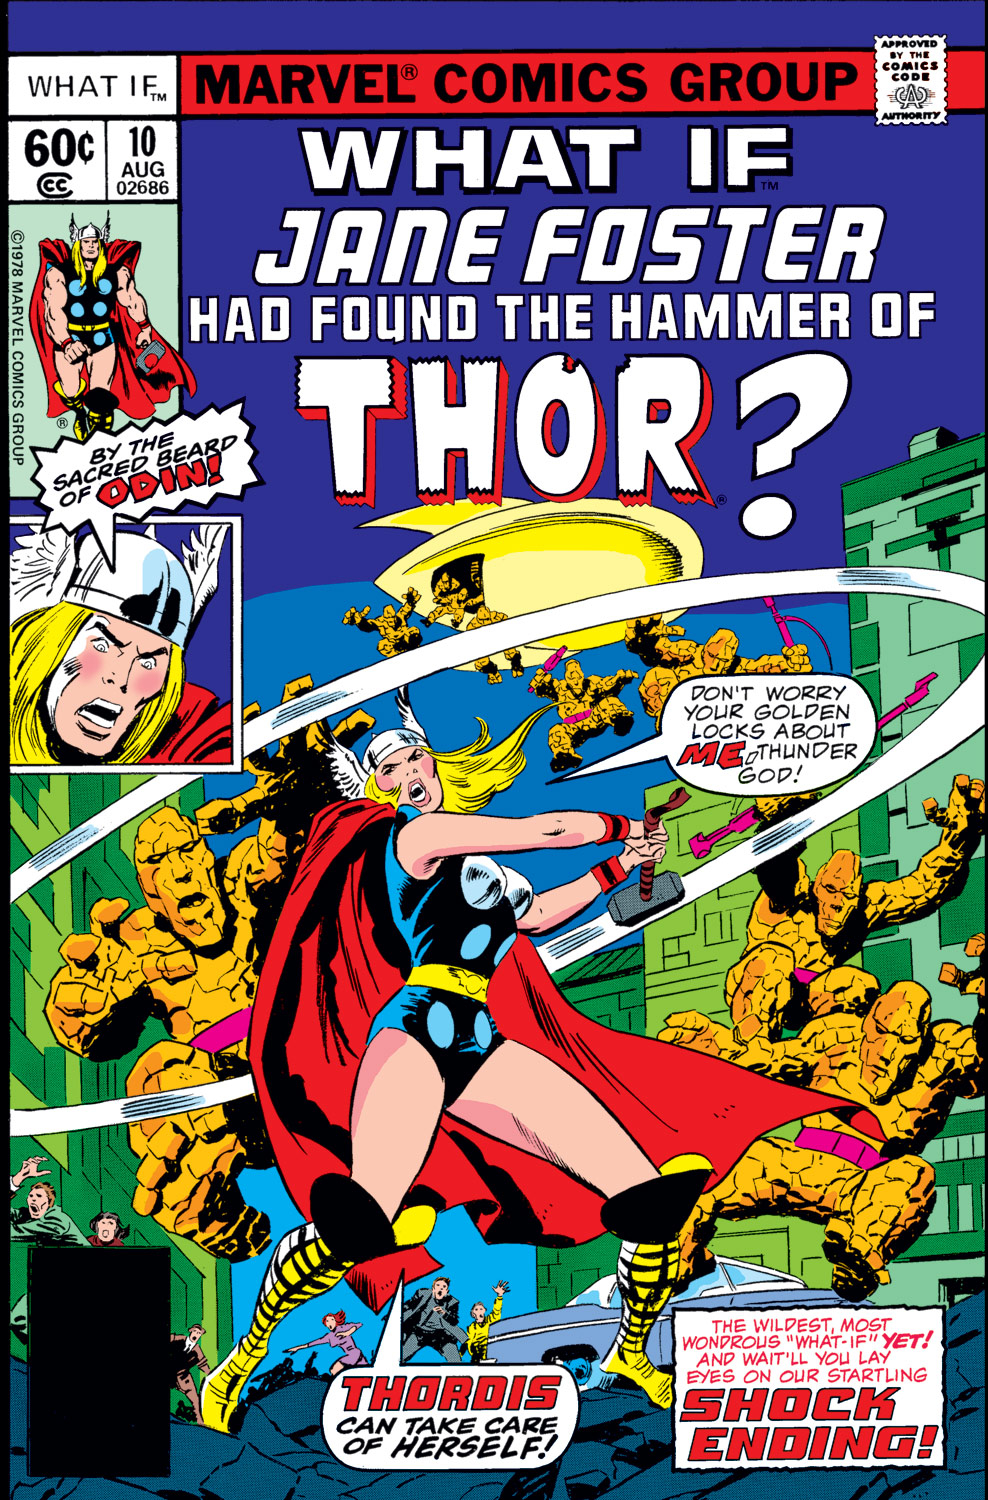 <{ $series->title }} issue 10 - Jane Foster had found the hammer of Thor - Page 1